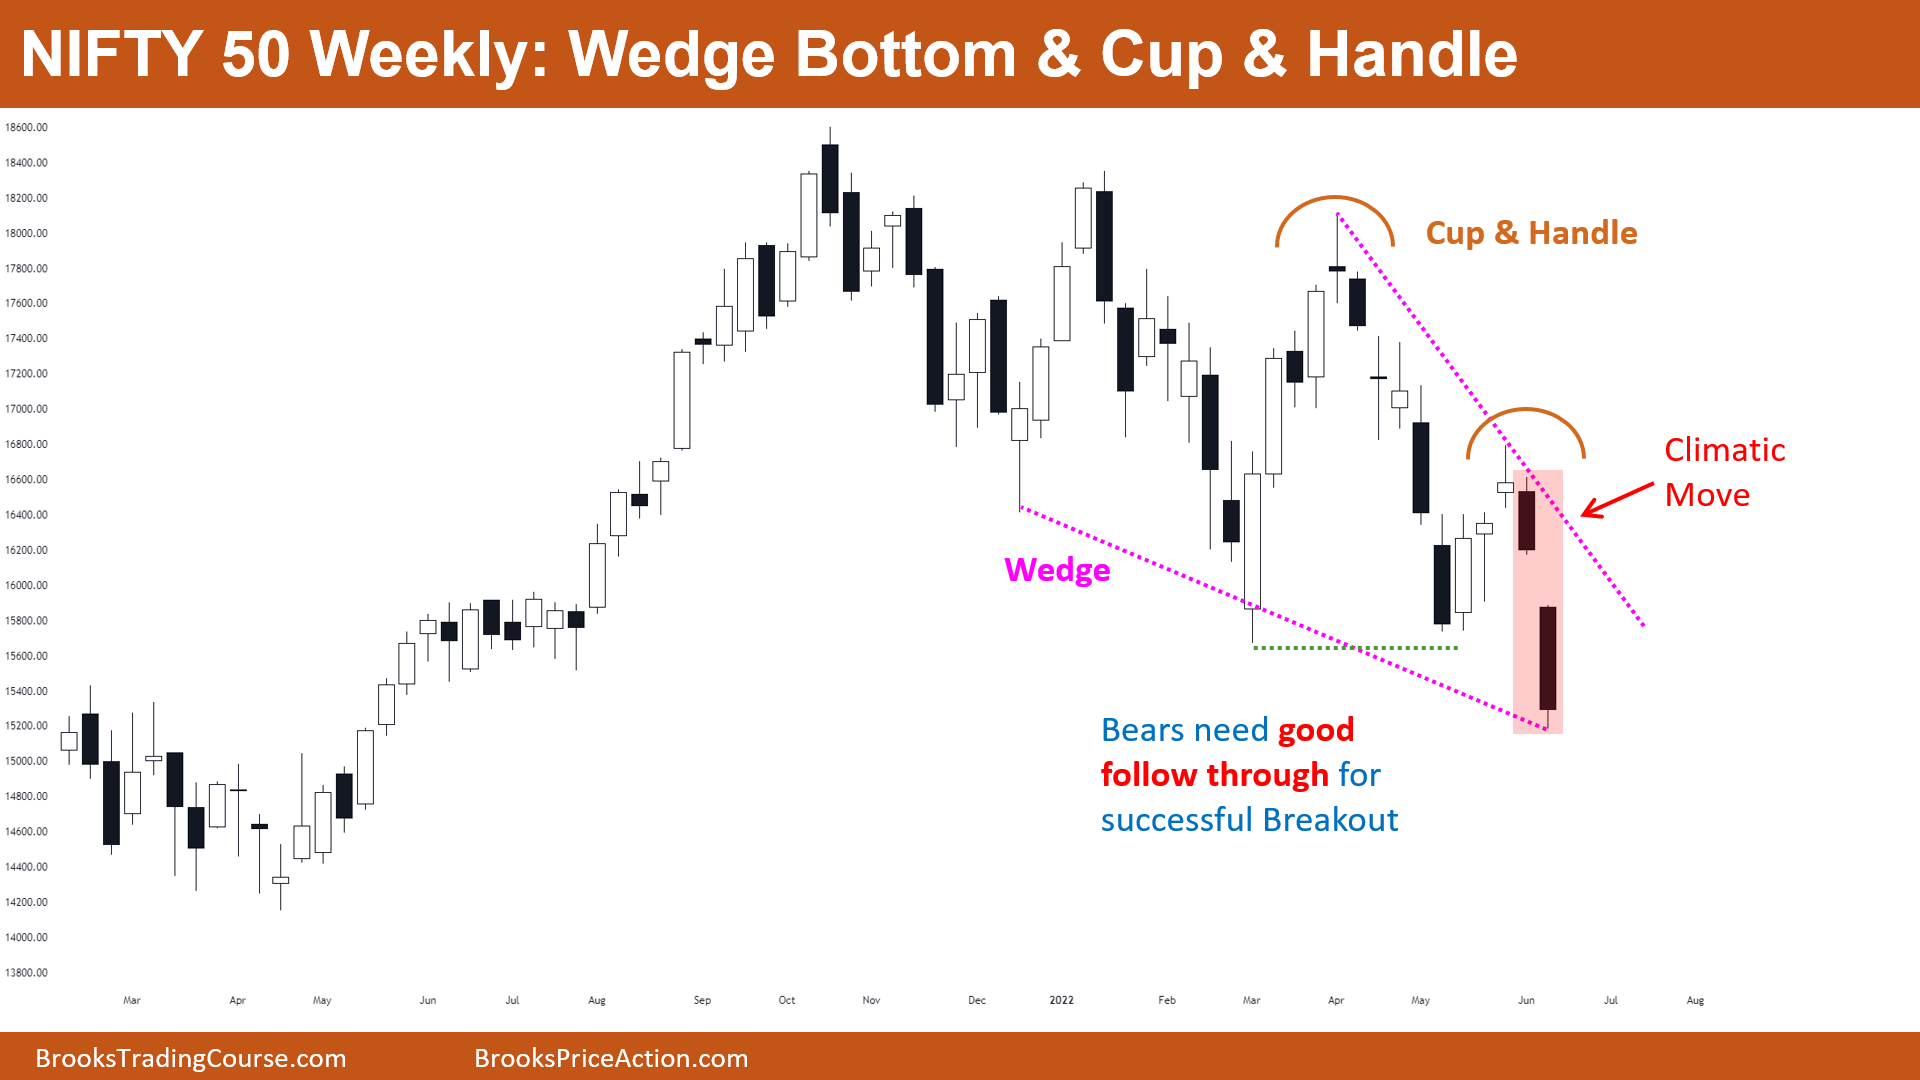 Nifty 50 wedge bottom and cup & handle